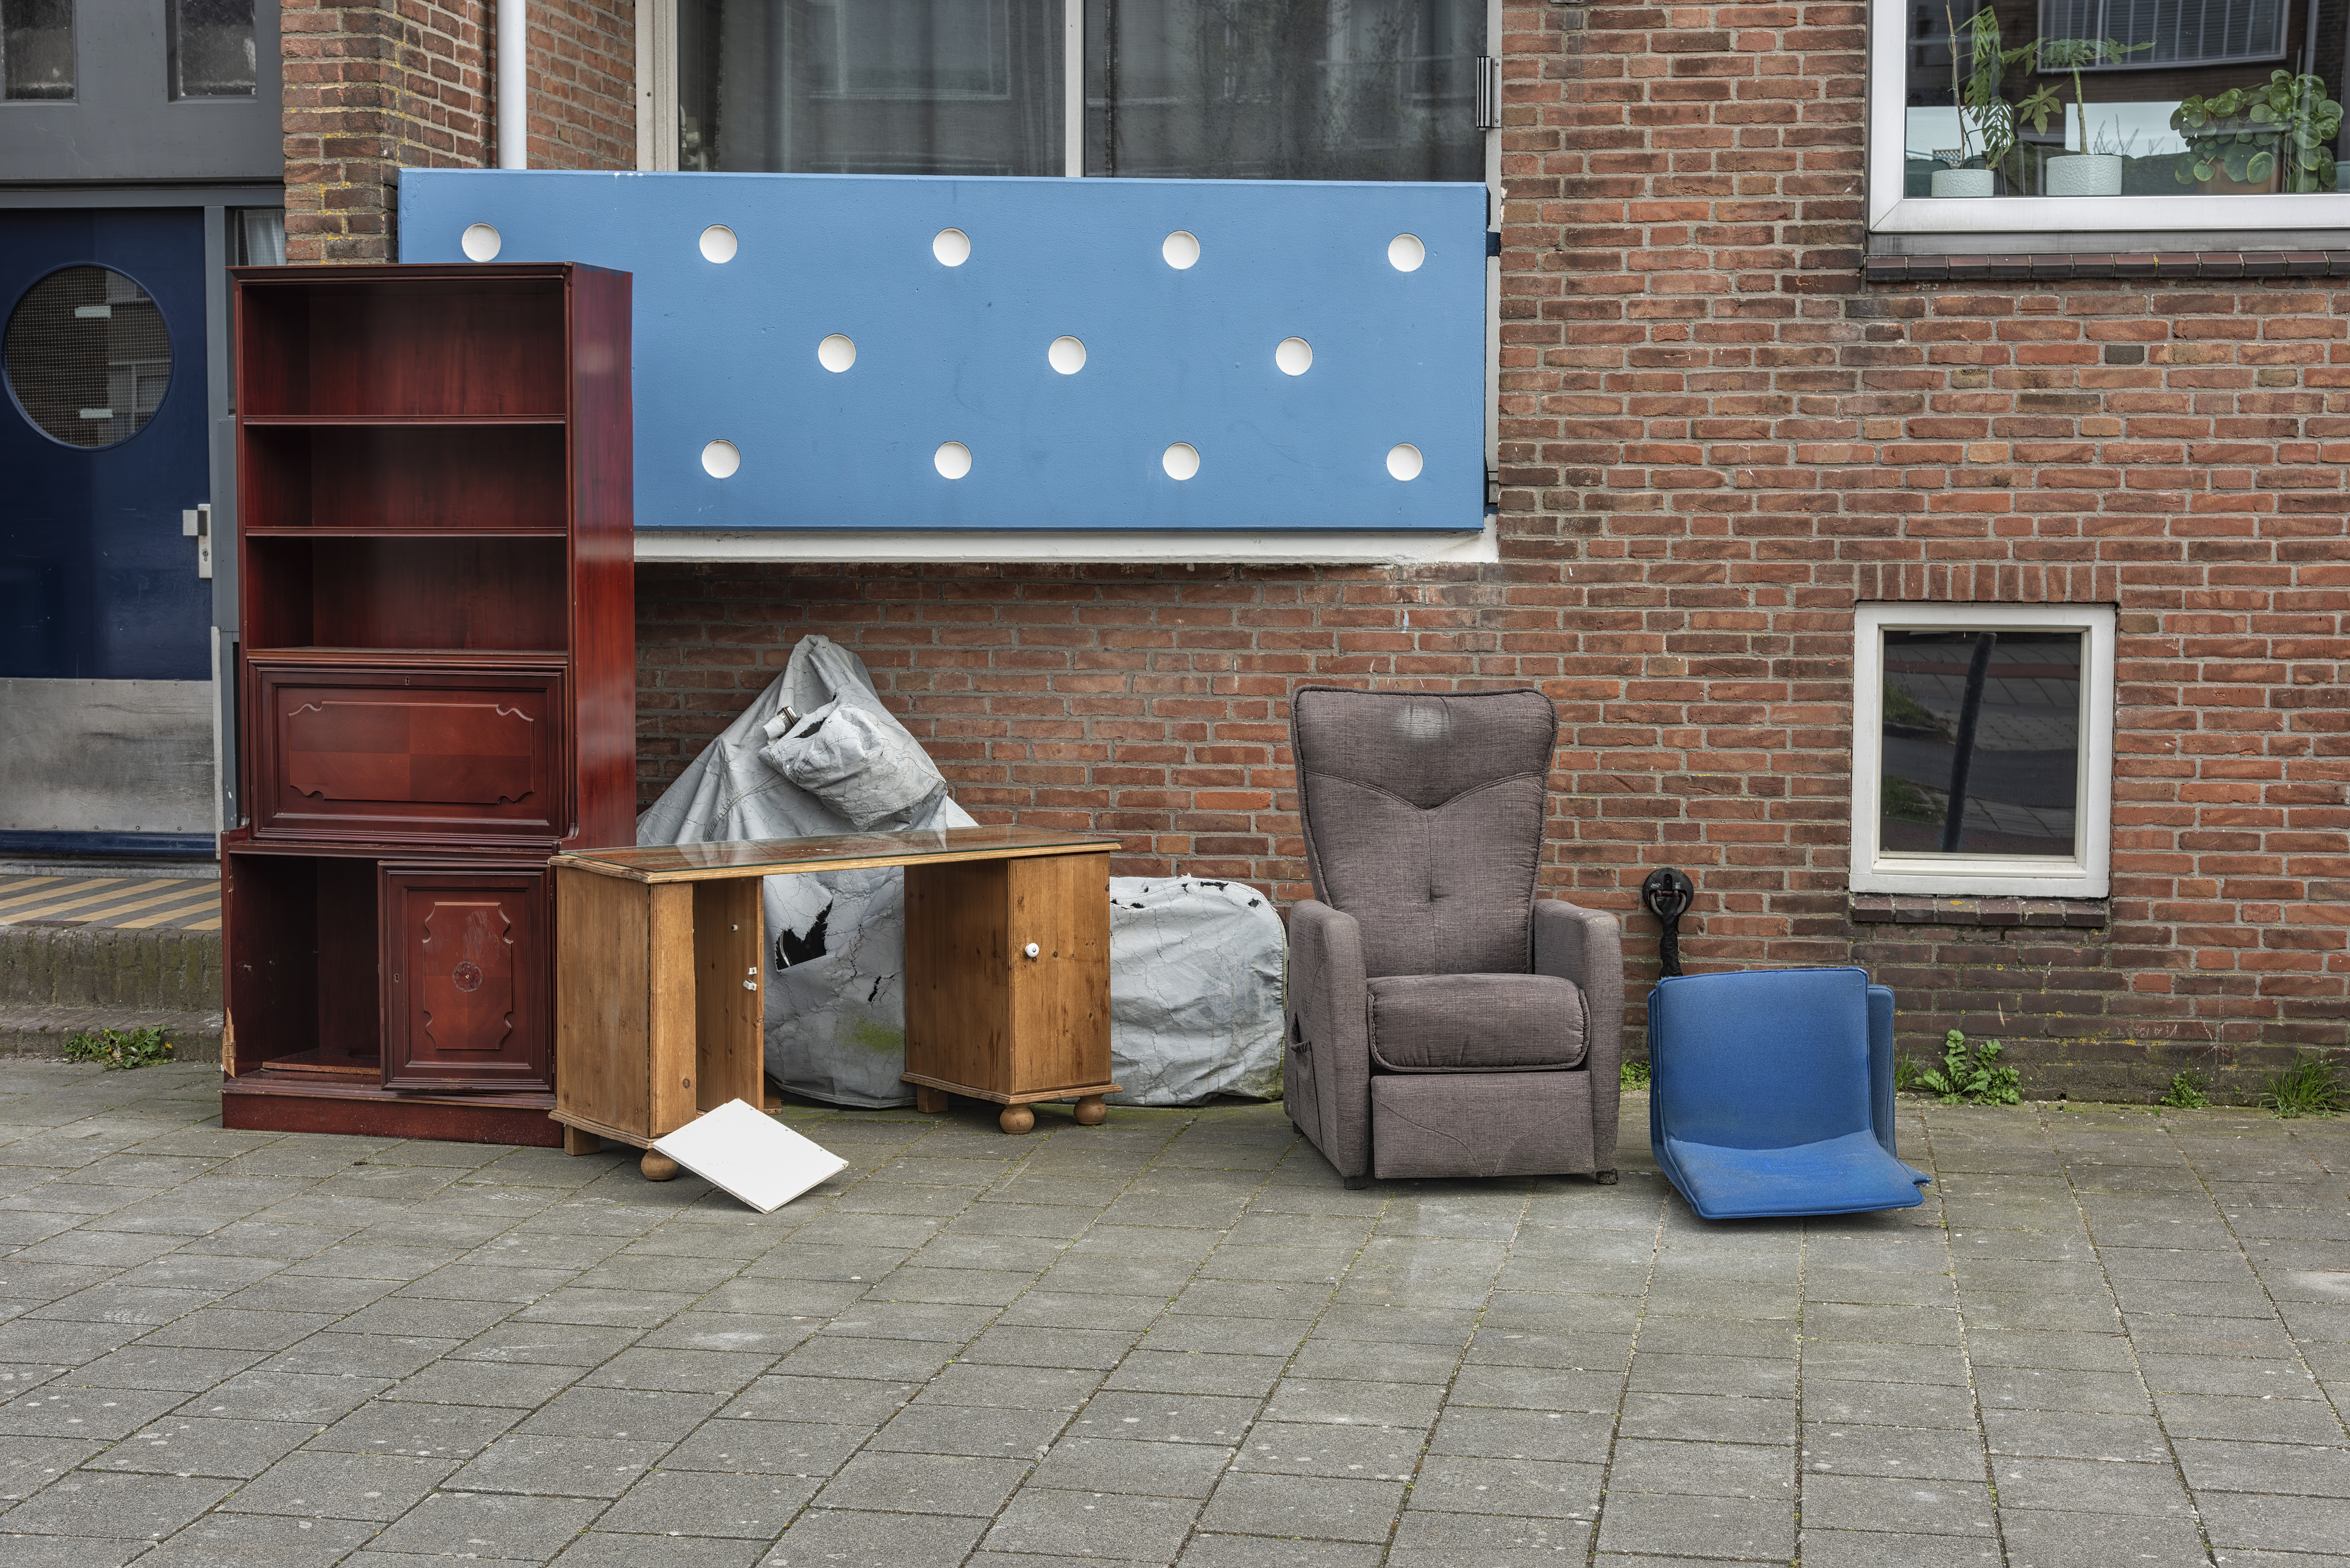 Various pieces of old, discarded furniture, including a bookshelf, cabinets, an armchair, and a blue seat, placed outside a brick building on the sidewalk